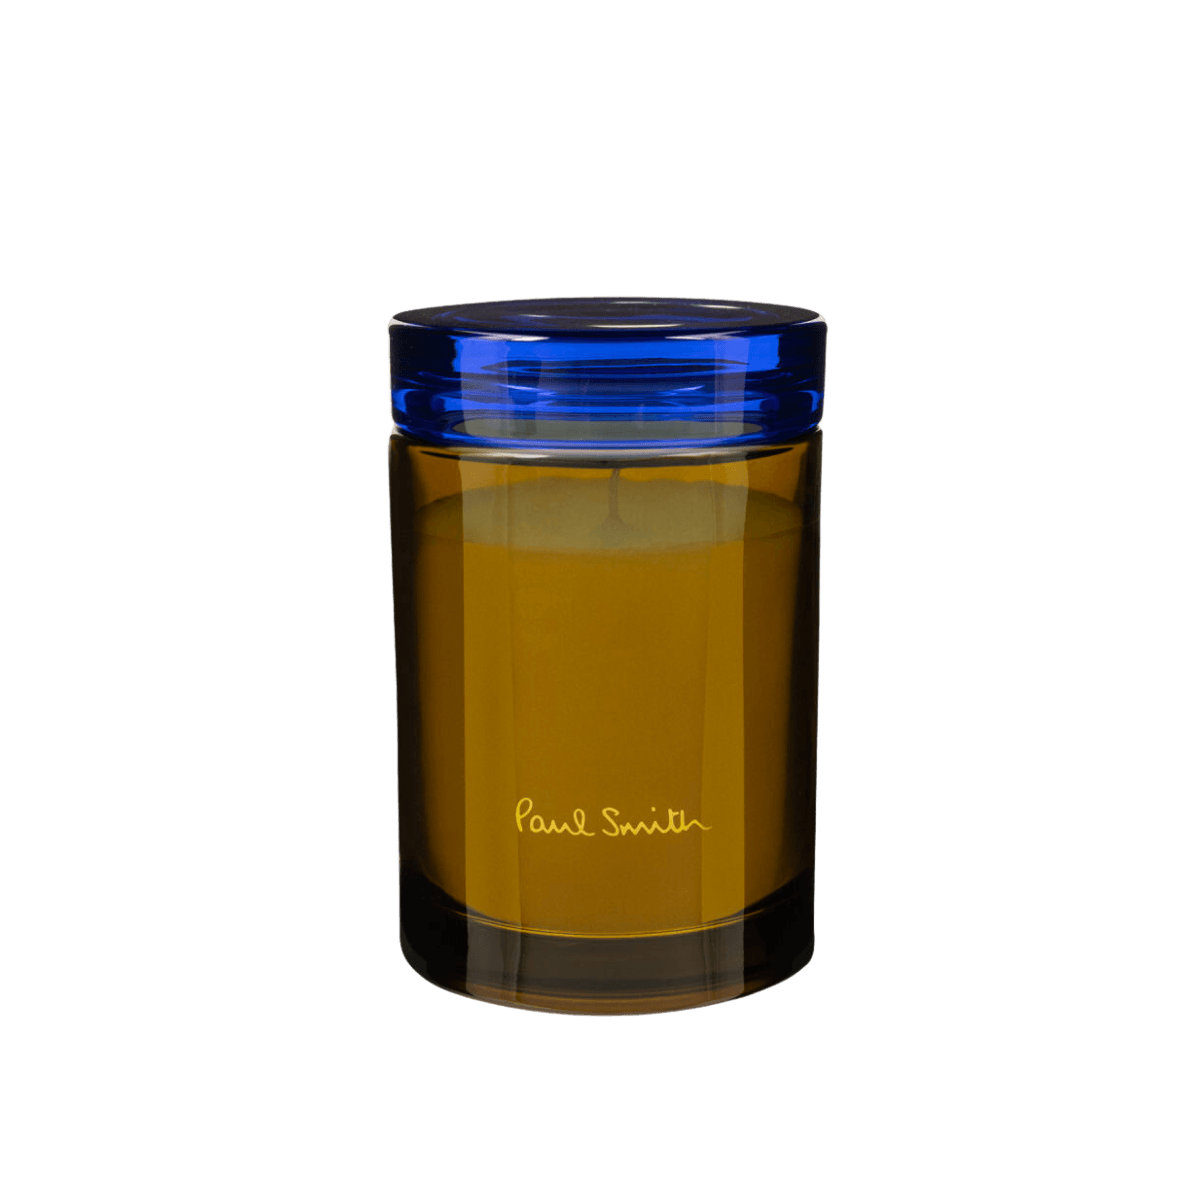 Paul Smith - Storyteller scented candle reed diffuser